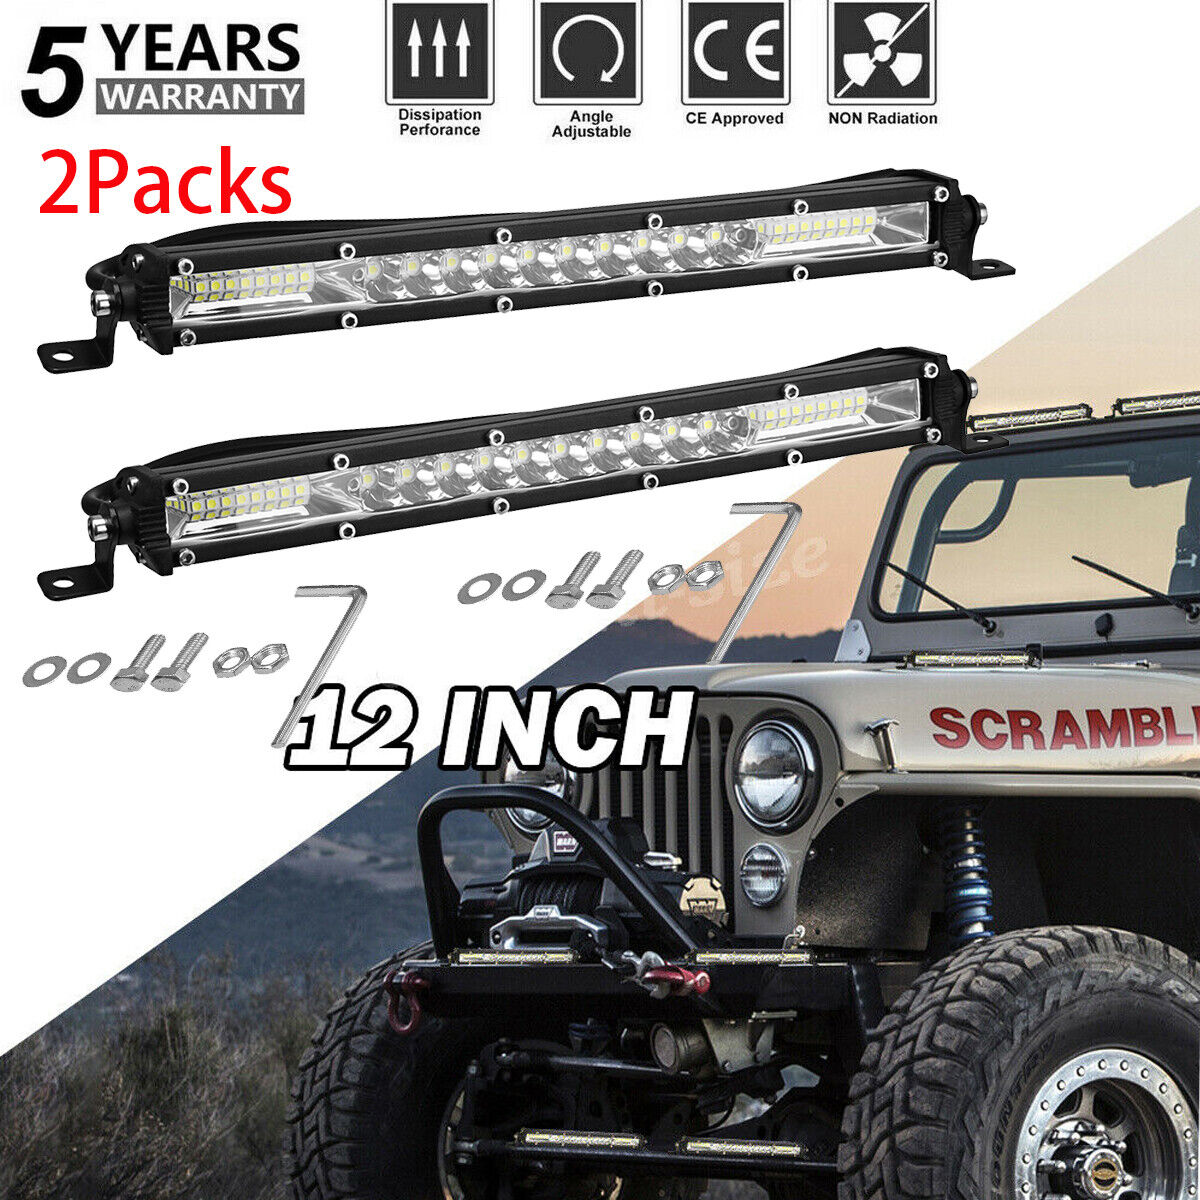 2x 12" inch 450W LED Work Light Bar Combo Spot Flood Driving Off Road SUV Boat Unbranded Does Not Apply